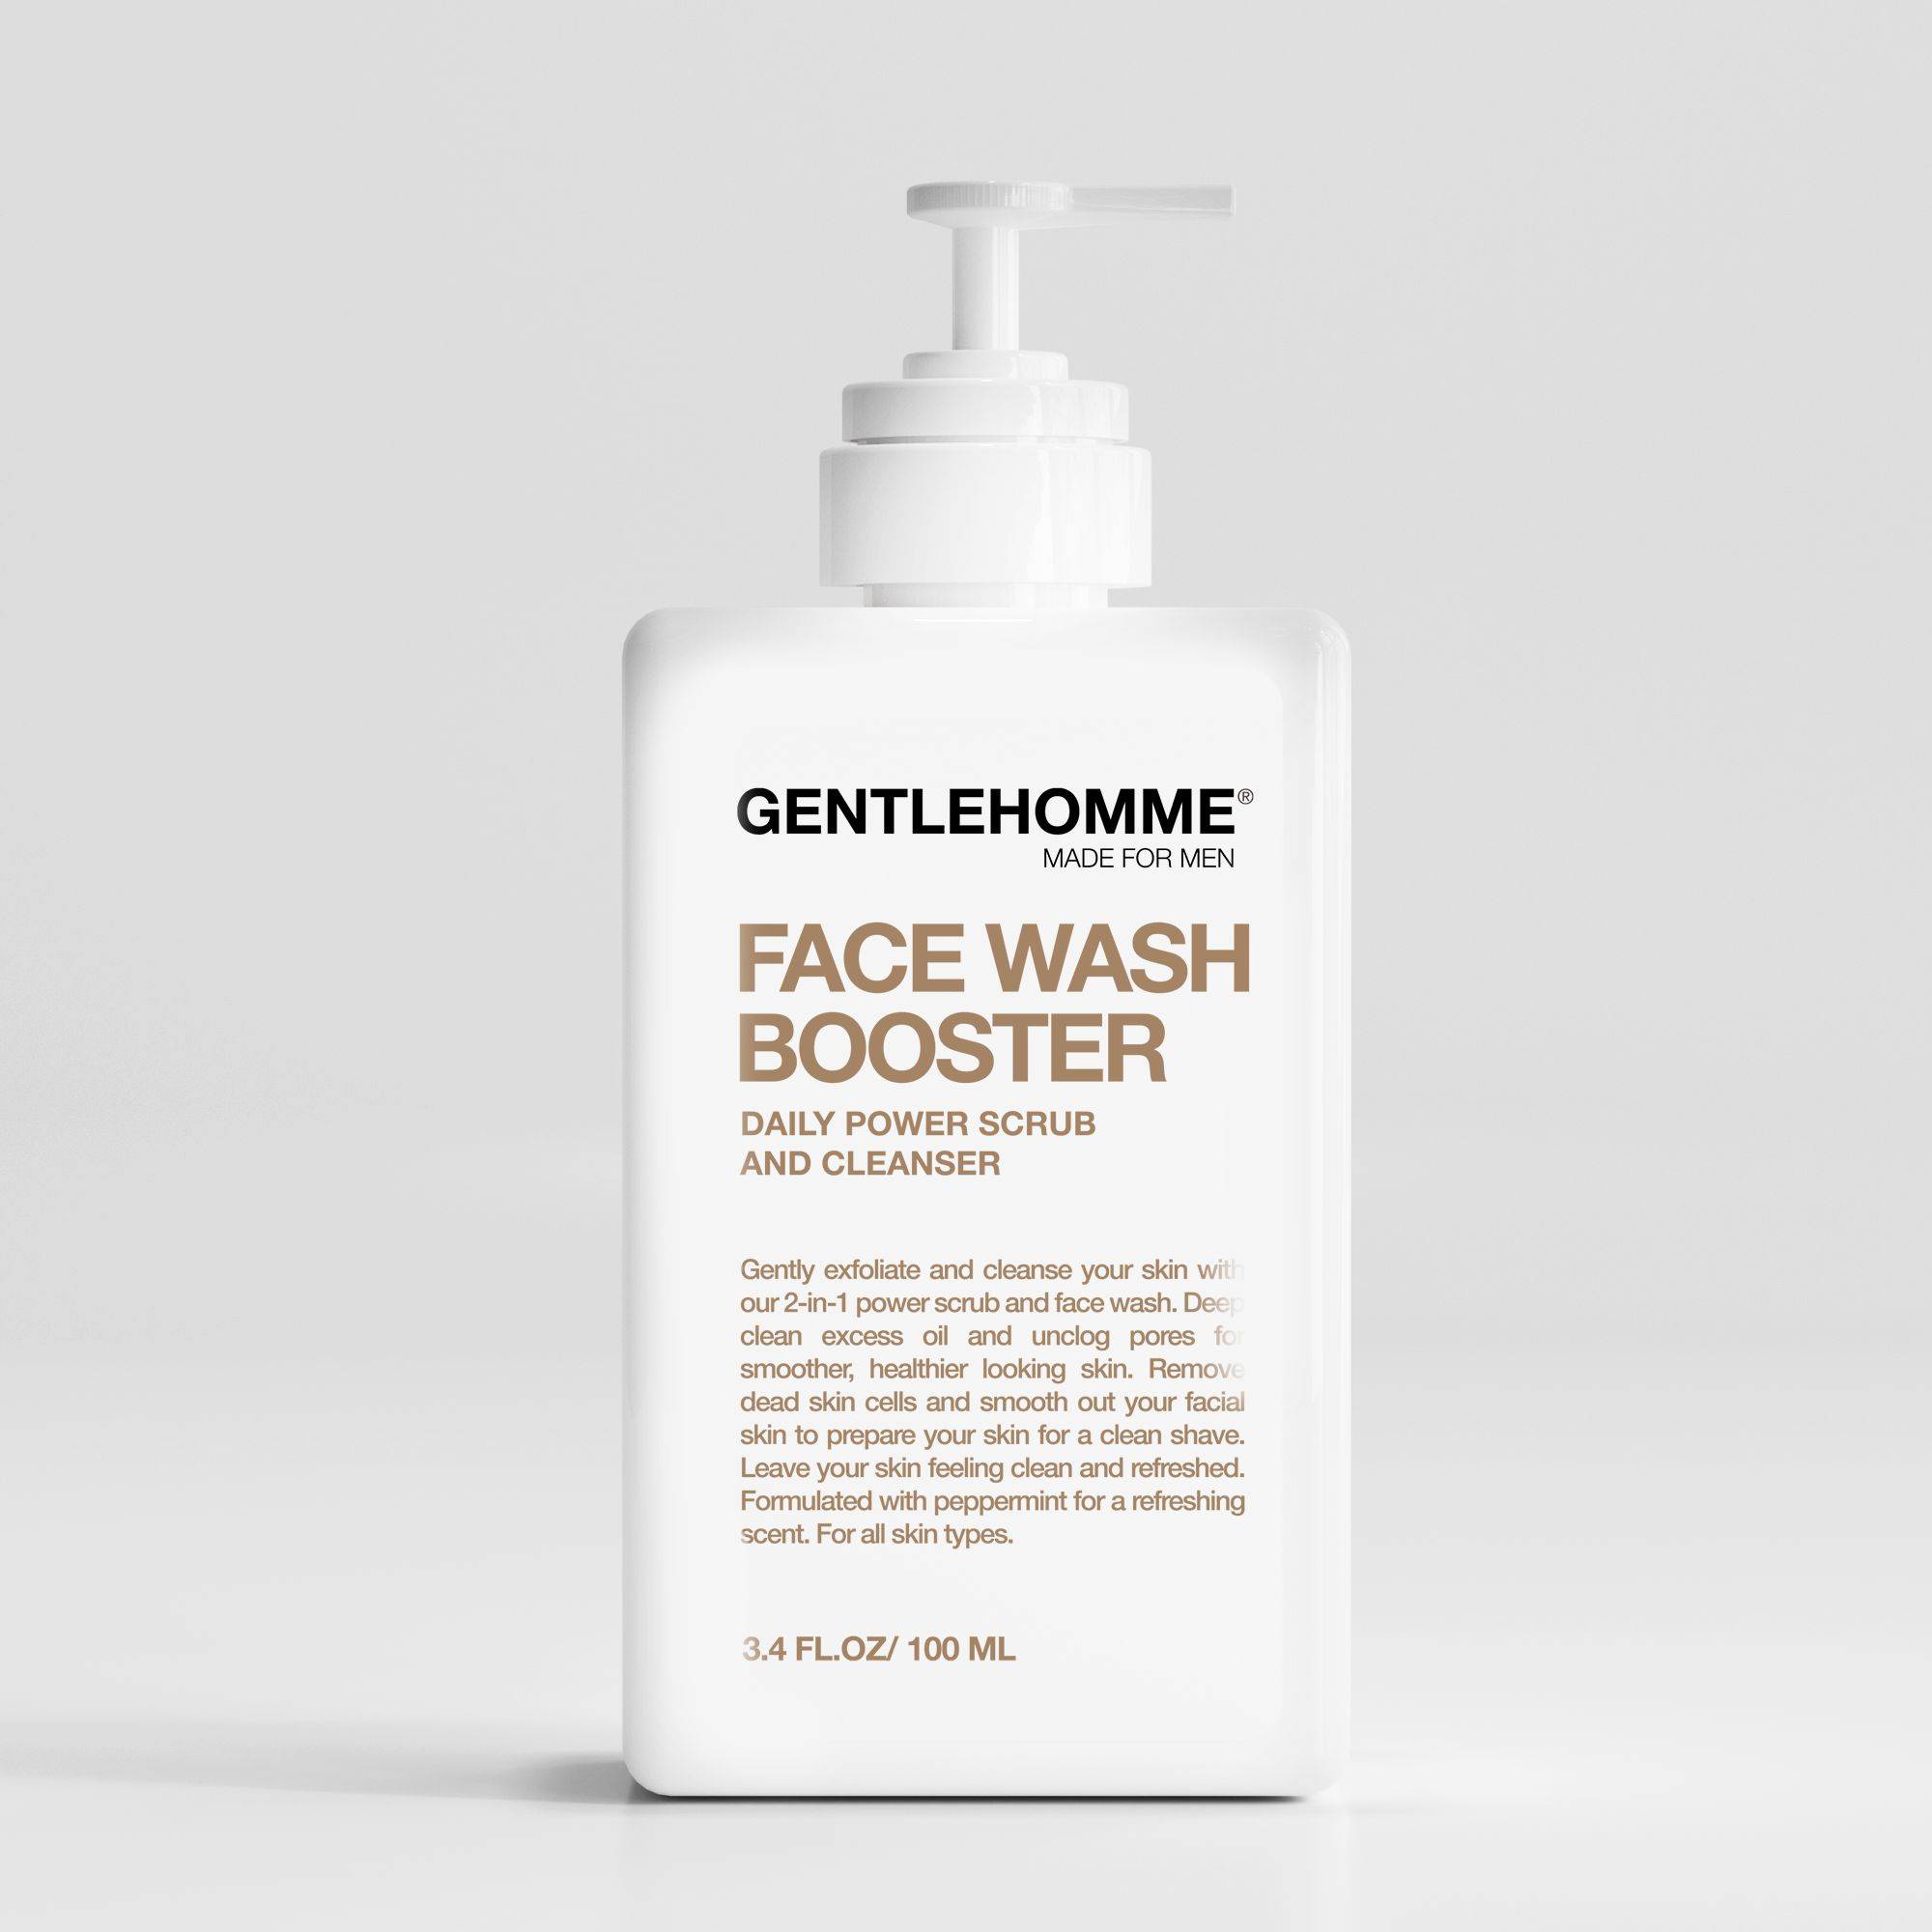 Gentlehomme  Face Wash Booster